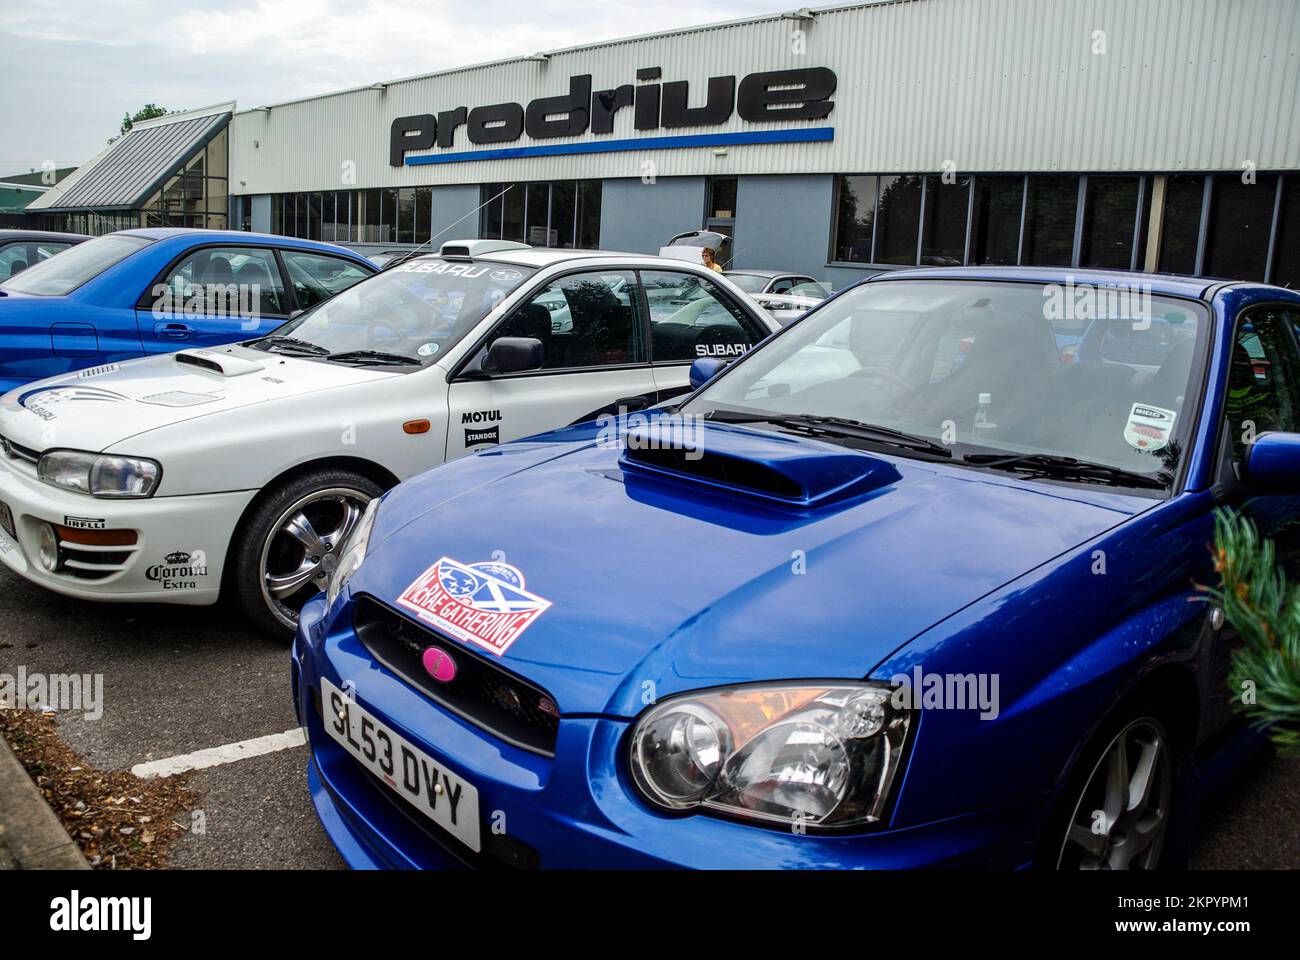 McRae Gathering. Around 1200 Subaru Impreza cars gathered at Prodrive HQ in memory of Colin McRae on anniversary of his death. Parked cars outside Stock Photo